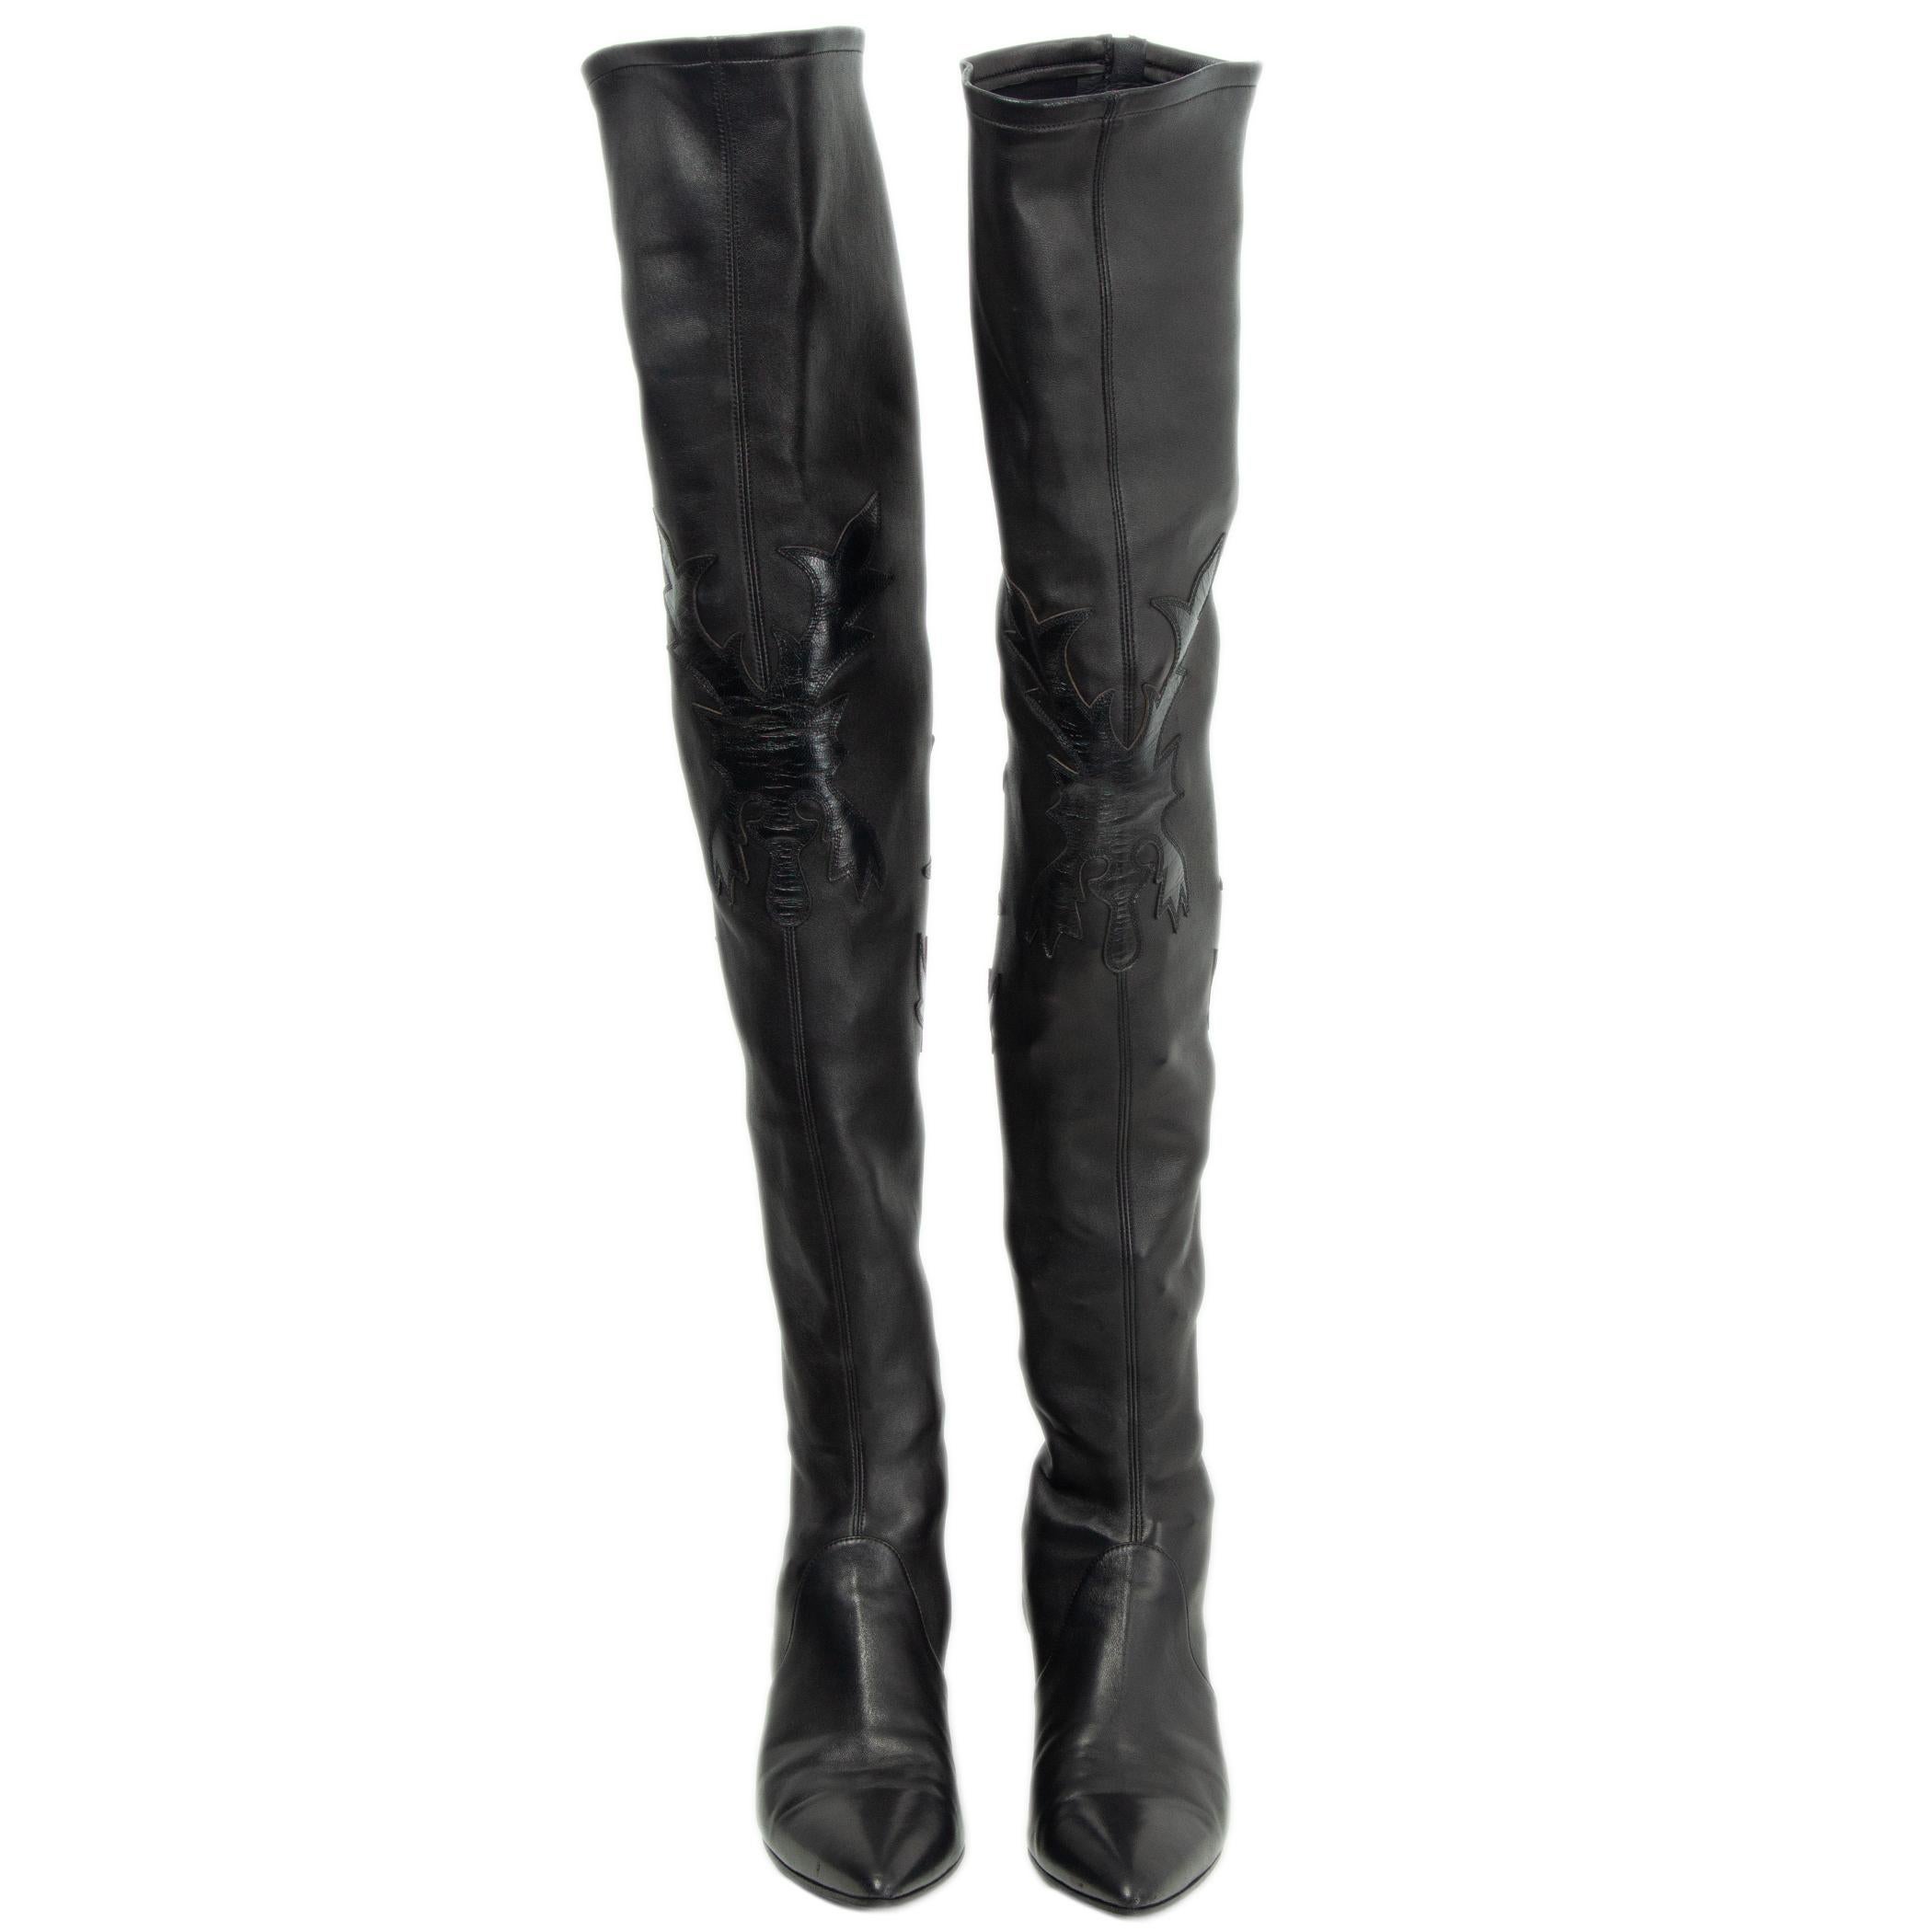 100% authentic Chanel thigh-high over-knee boots in black smooth lambskin leather with western appliques. Featuring a pointed-toe and block heel. Open with a zipper on the back of the shaft. Have been worn and are in excellent condition. Come with